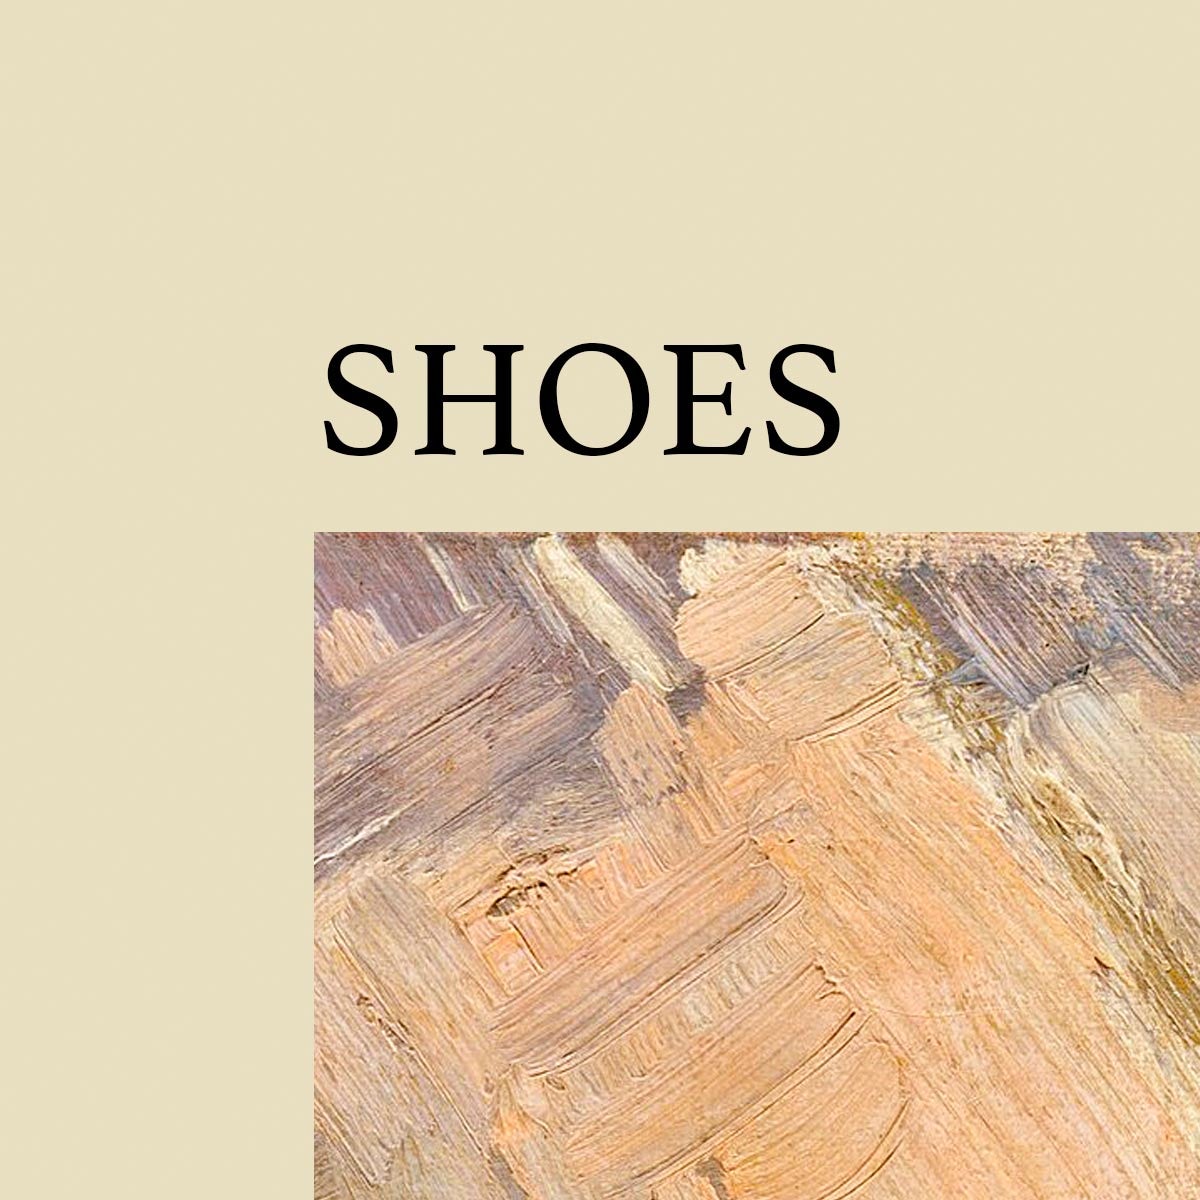 Shoes Art Poster by Van Gogh